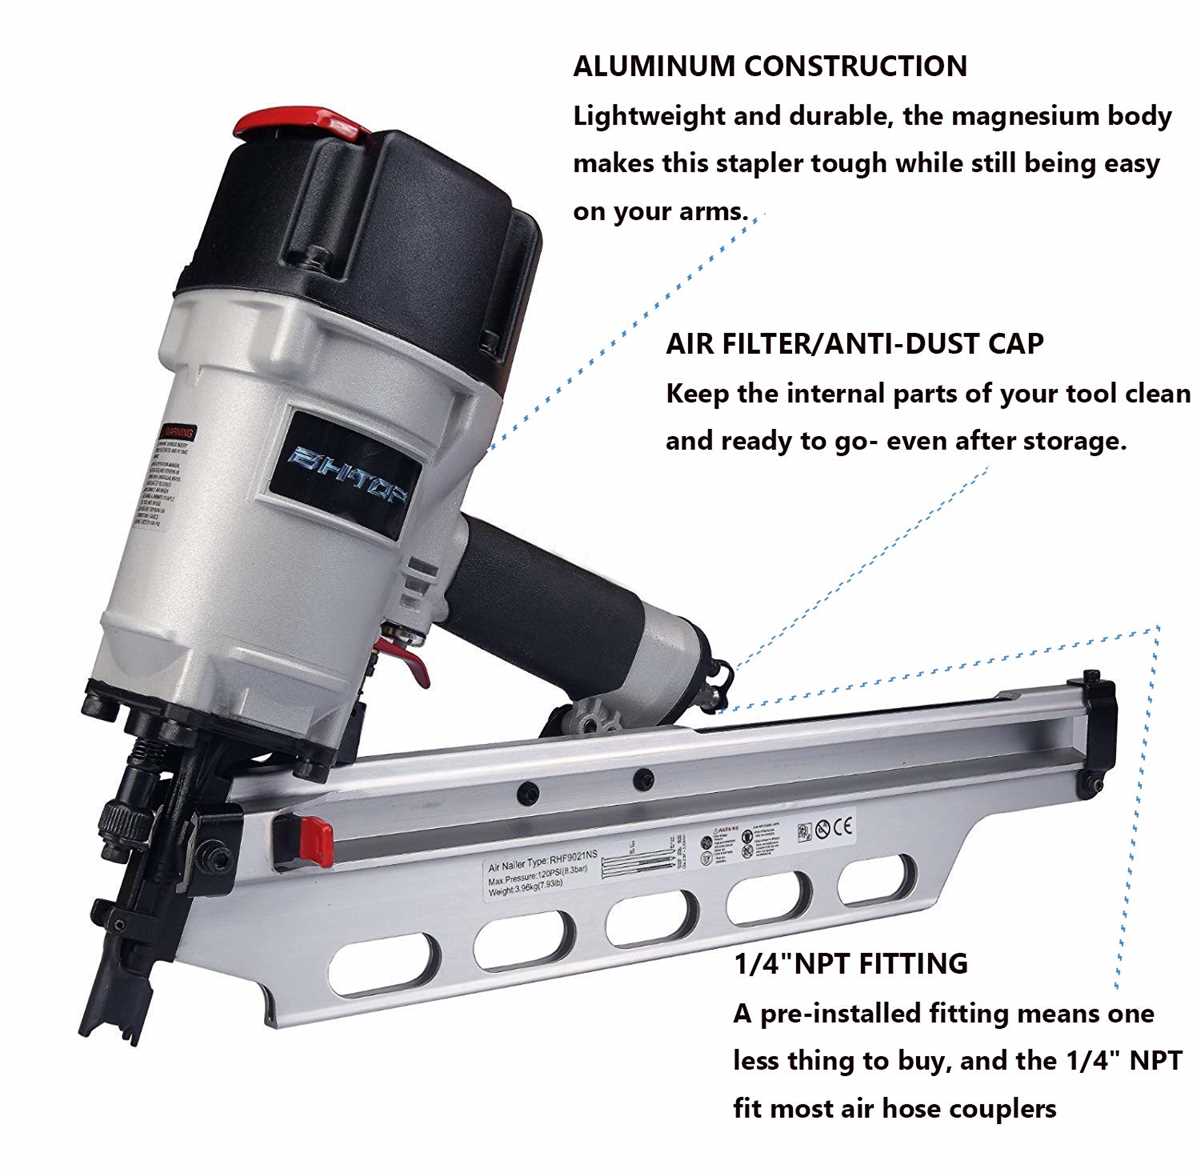 Tips for Proper Maintenance and Care of Your Central Pneumatic Framing Nailer